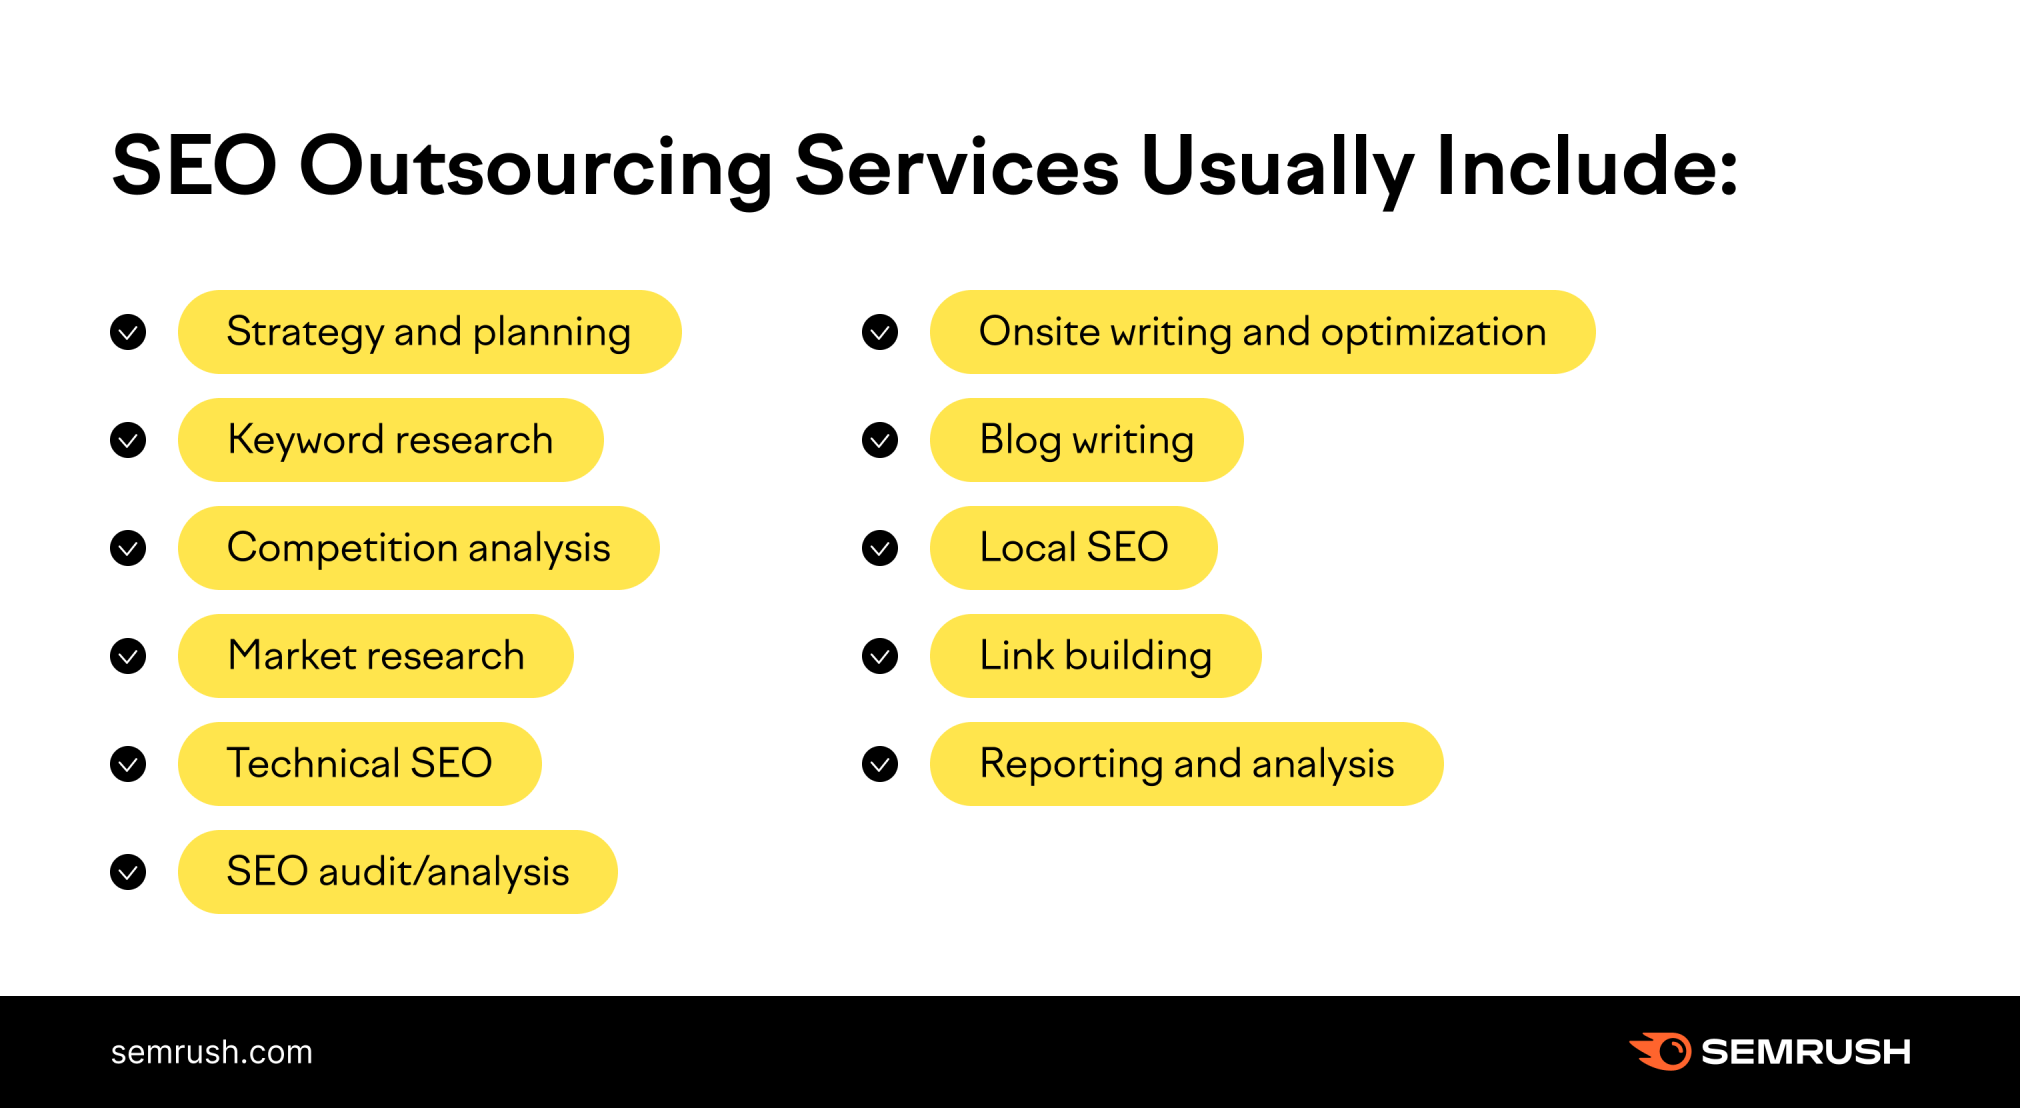 How to outsource SEO